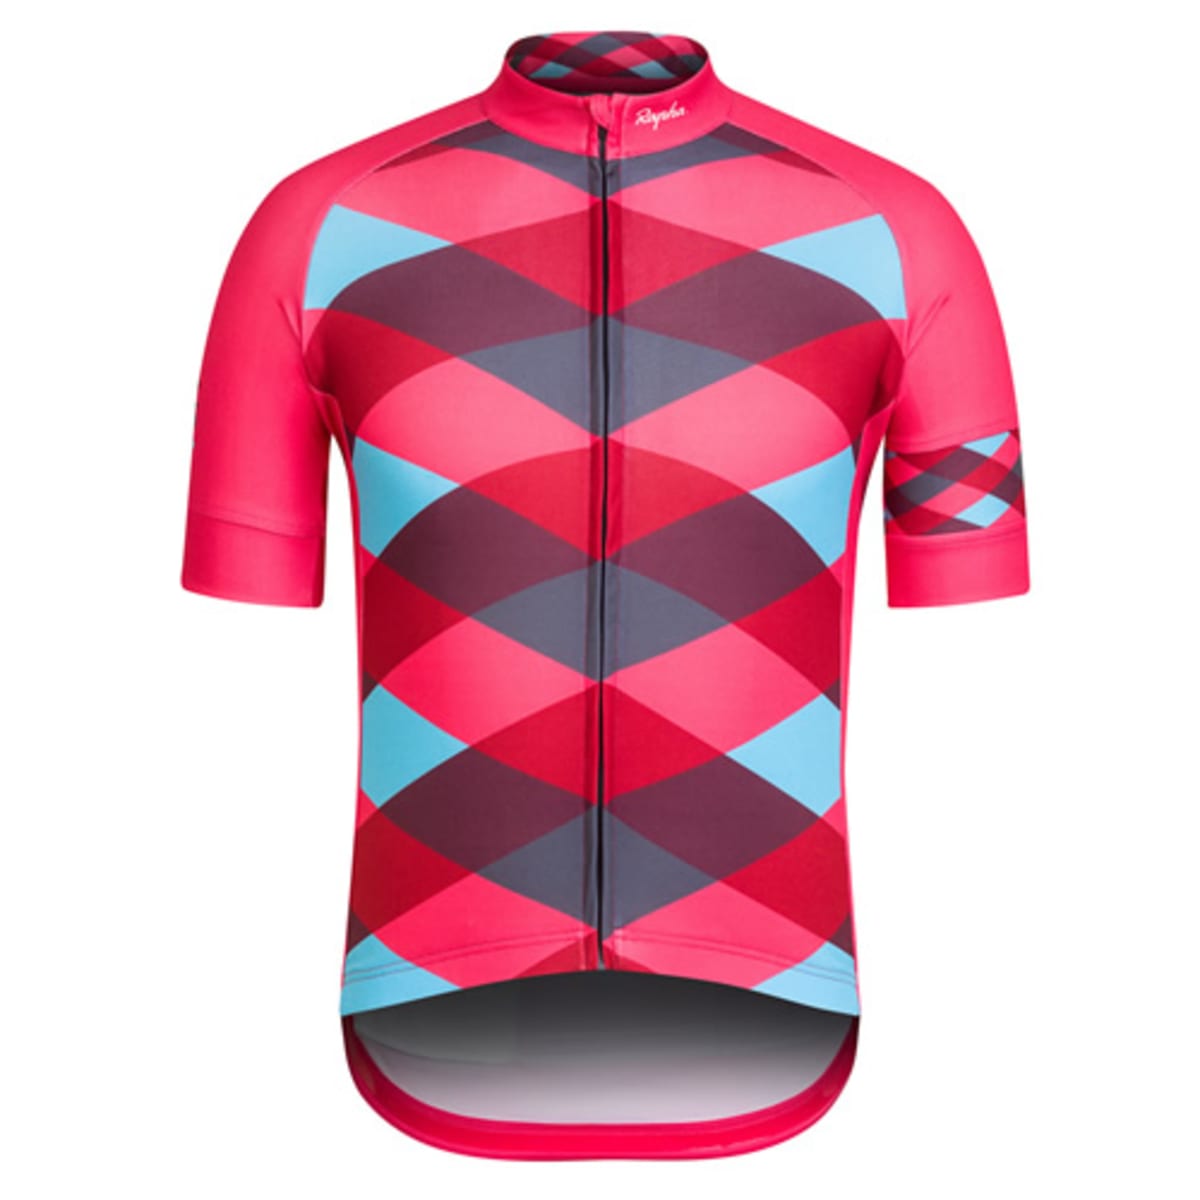 Rapha Cyclocross Jersey - Acquire